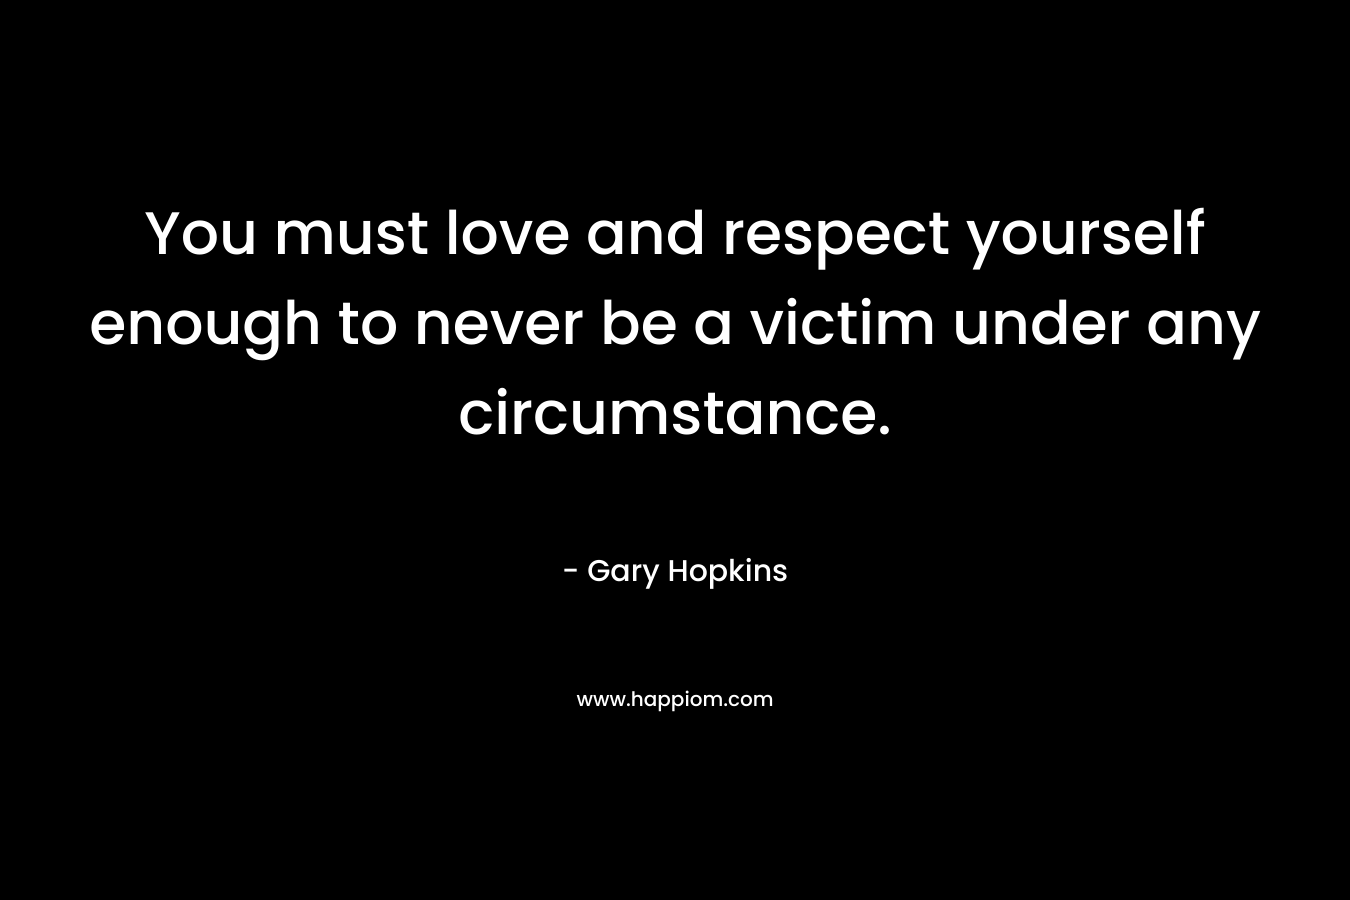 You must love and respect yourself enough to never be a victim under any circumstance.